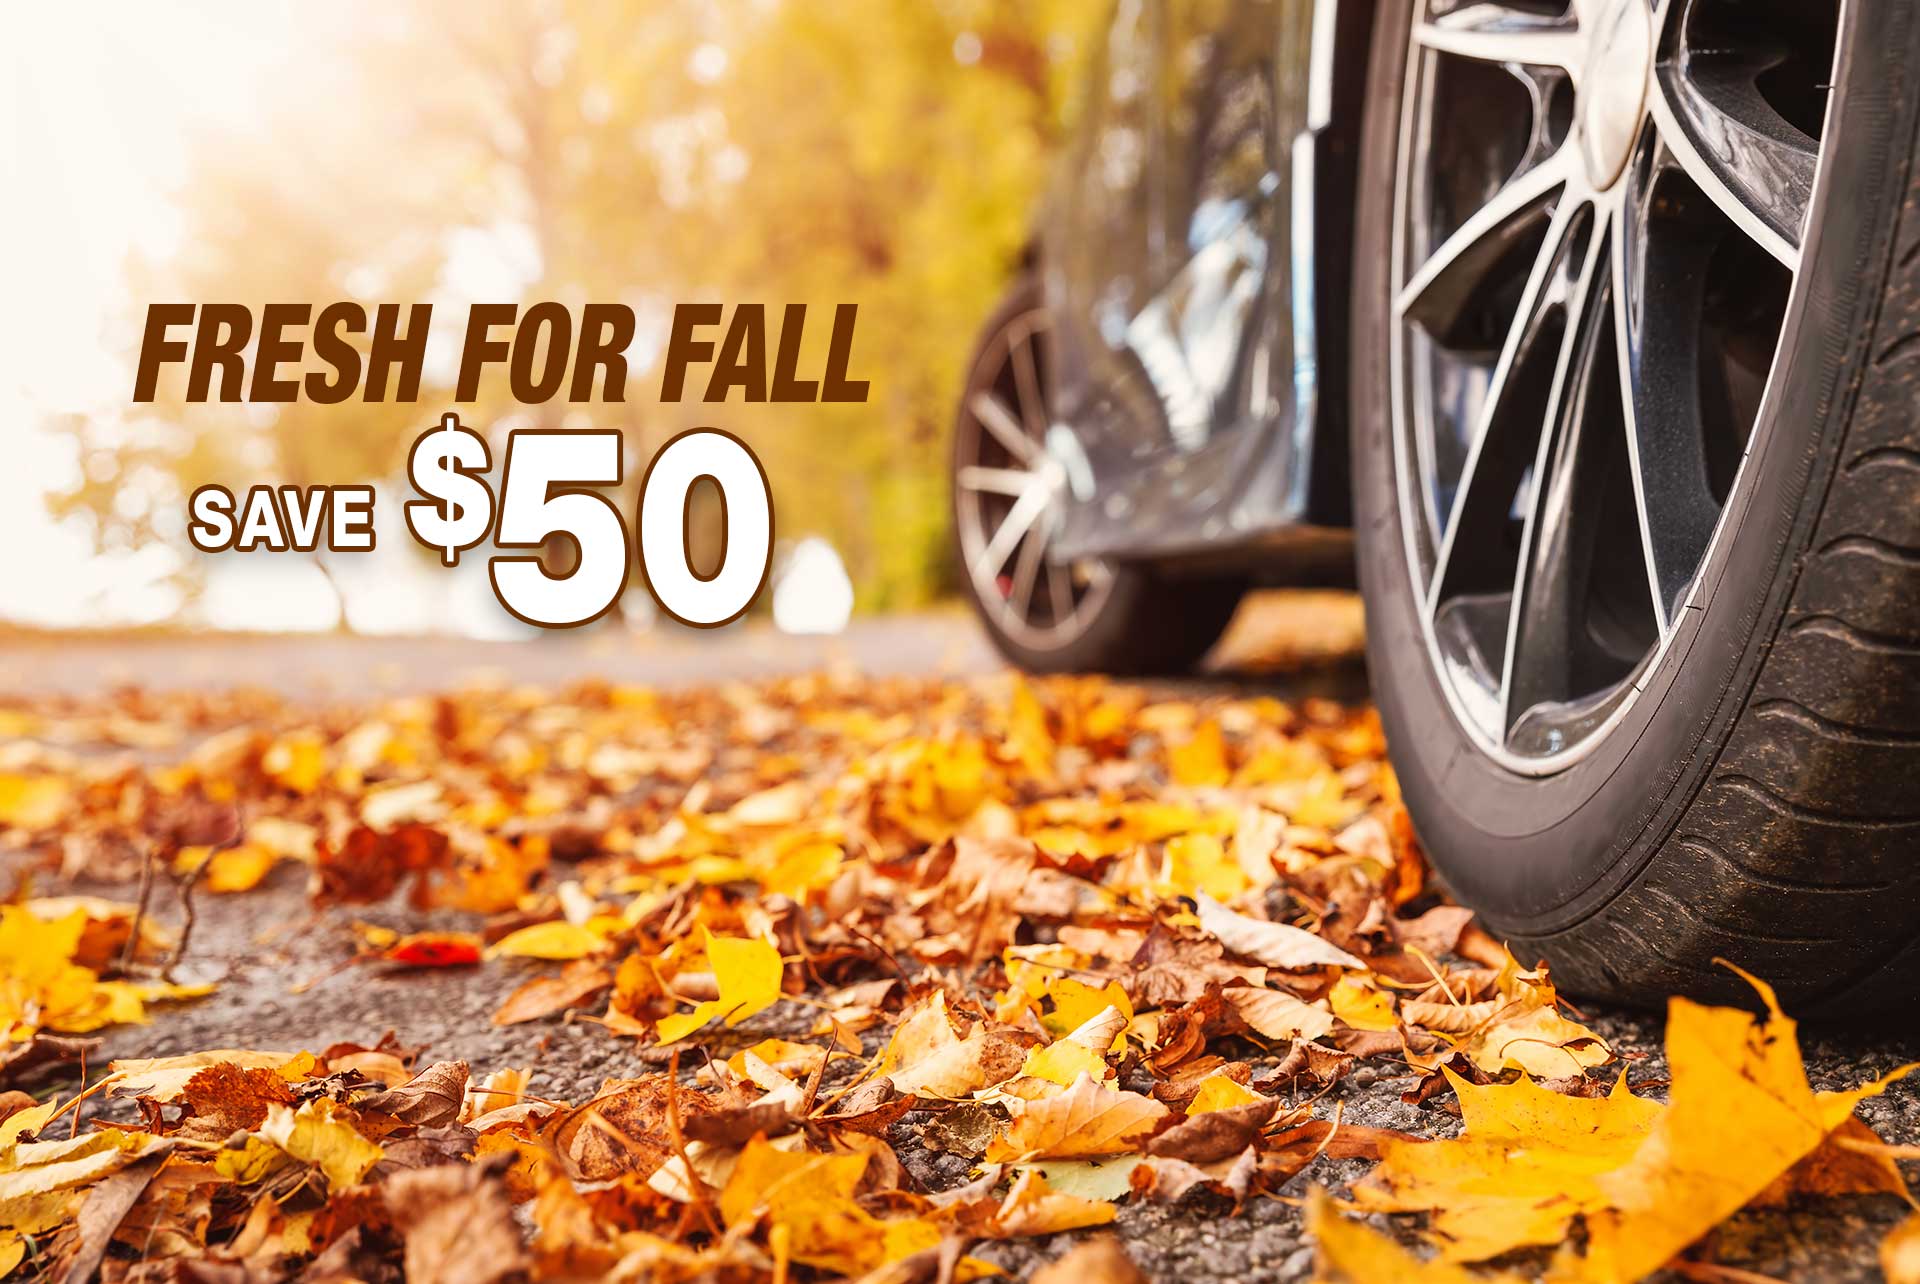 Parkville Fresh for Fall coupon | Parkville Auto Body